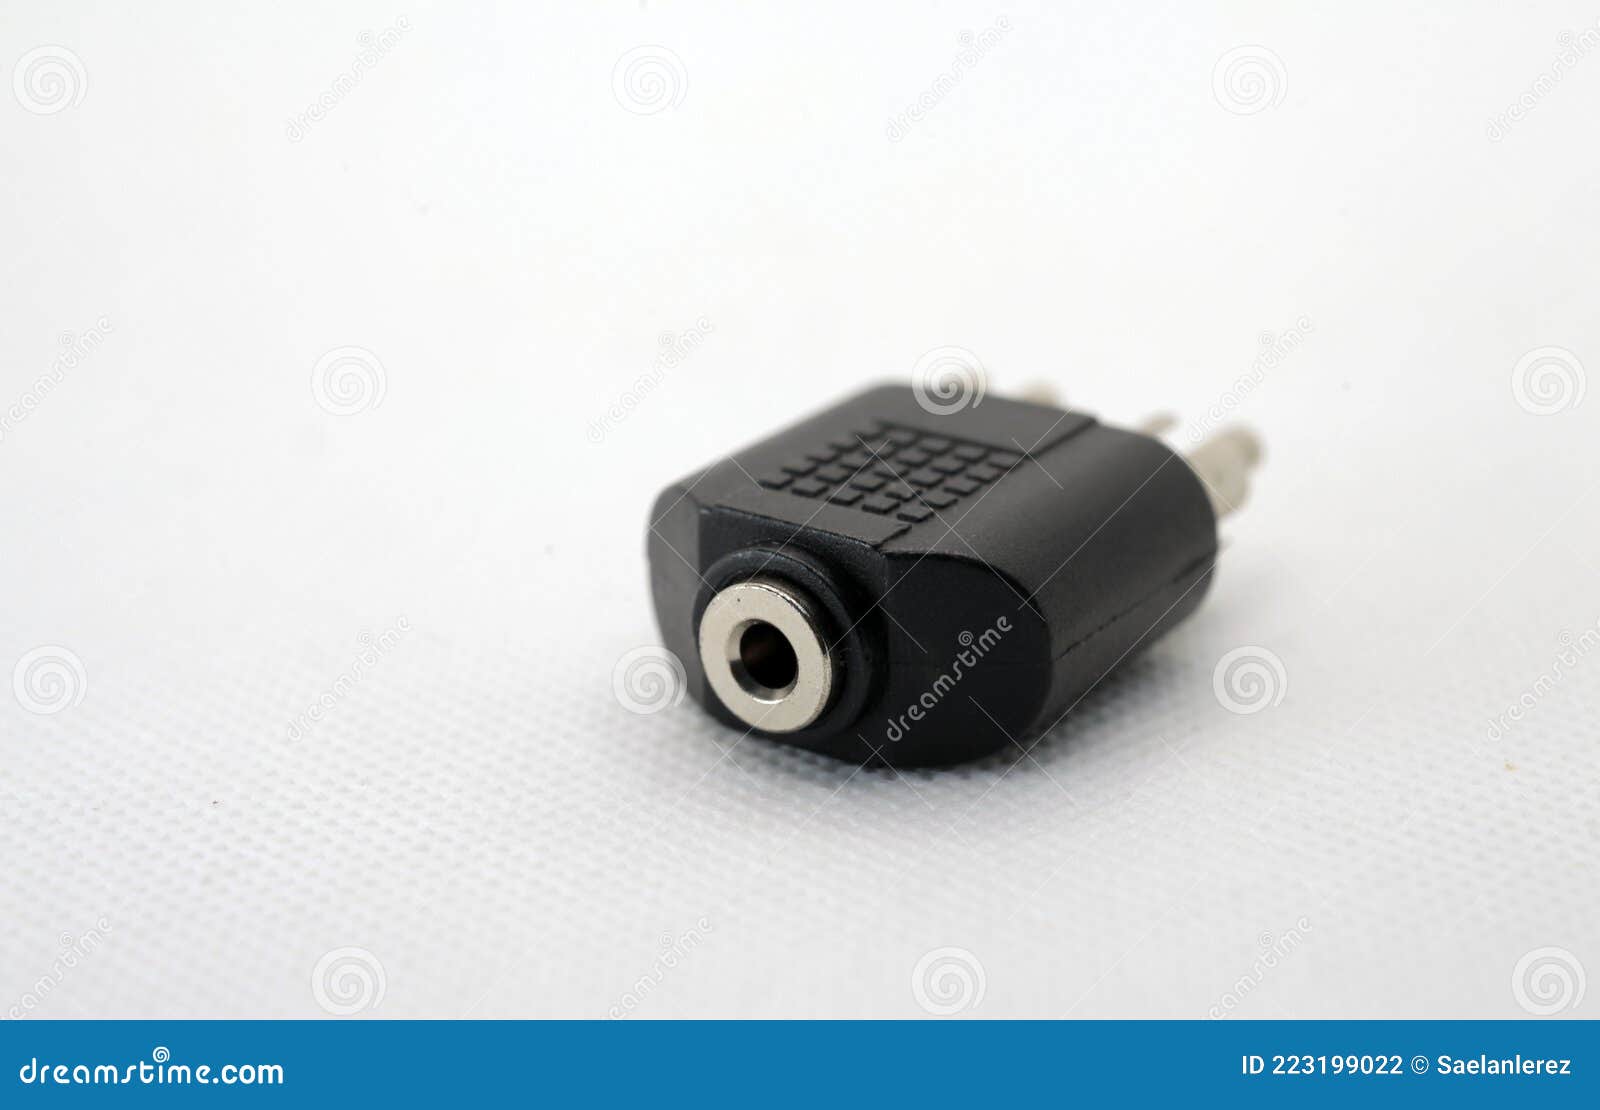 rca conector to 3,5 mm  white background